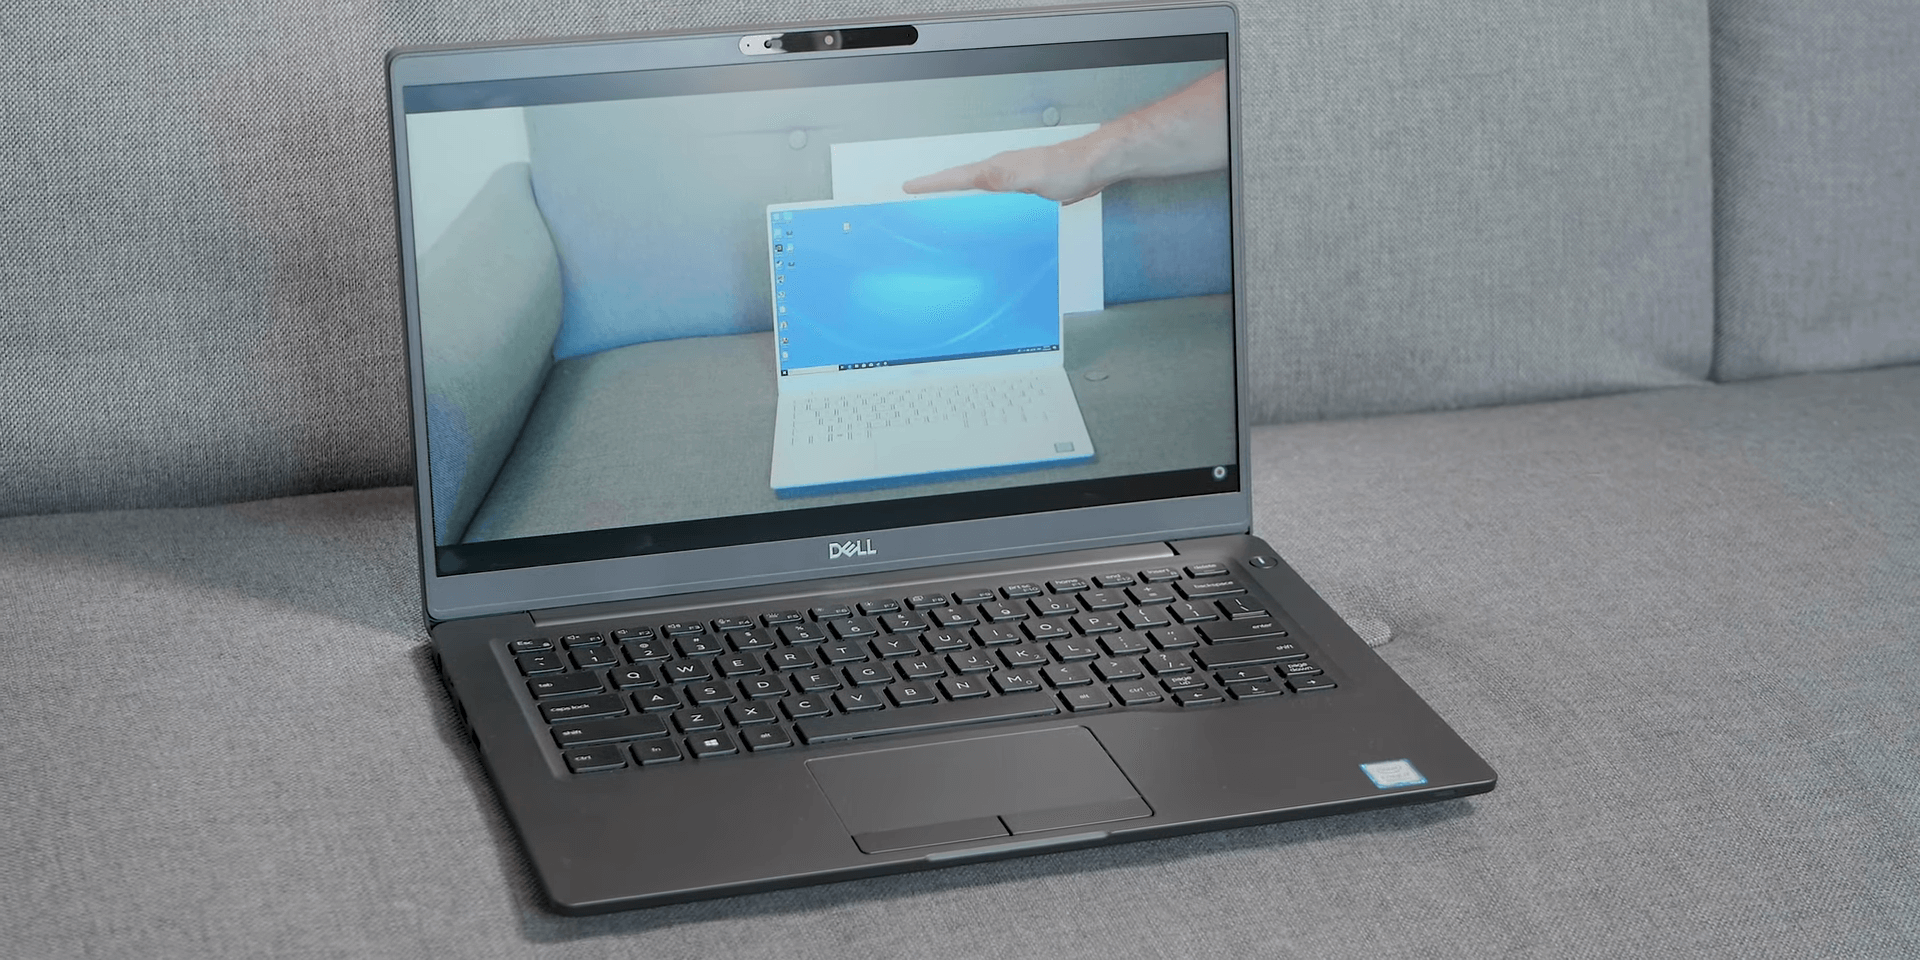 Dell Latitude 7400 Vs Latitude 7490 Which One You Should Buy The World S Best And Worst